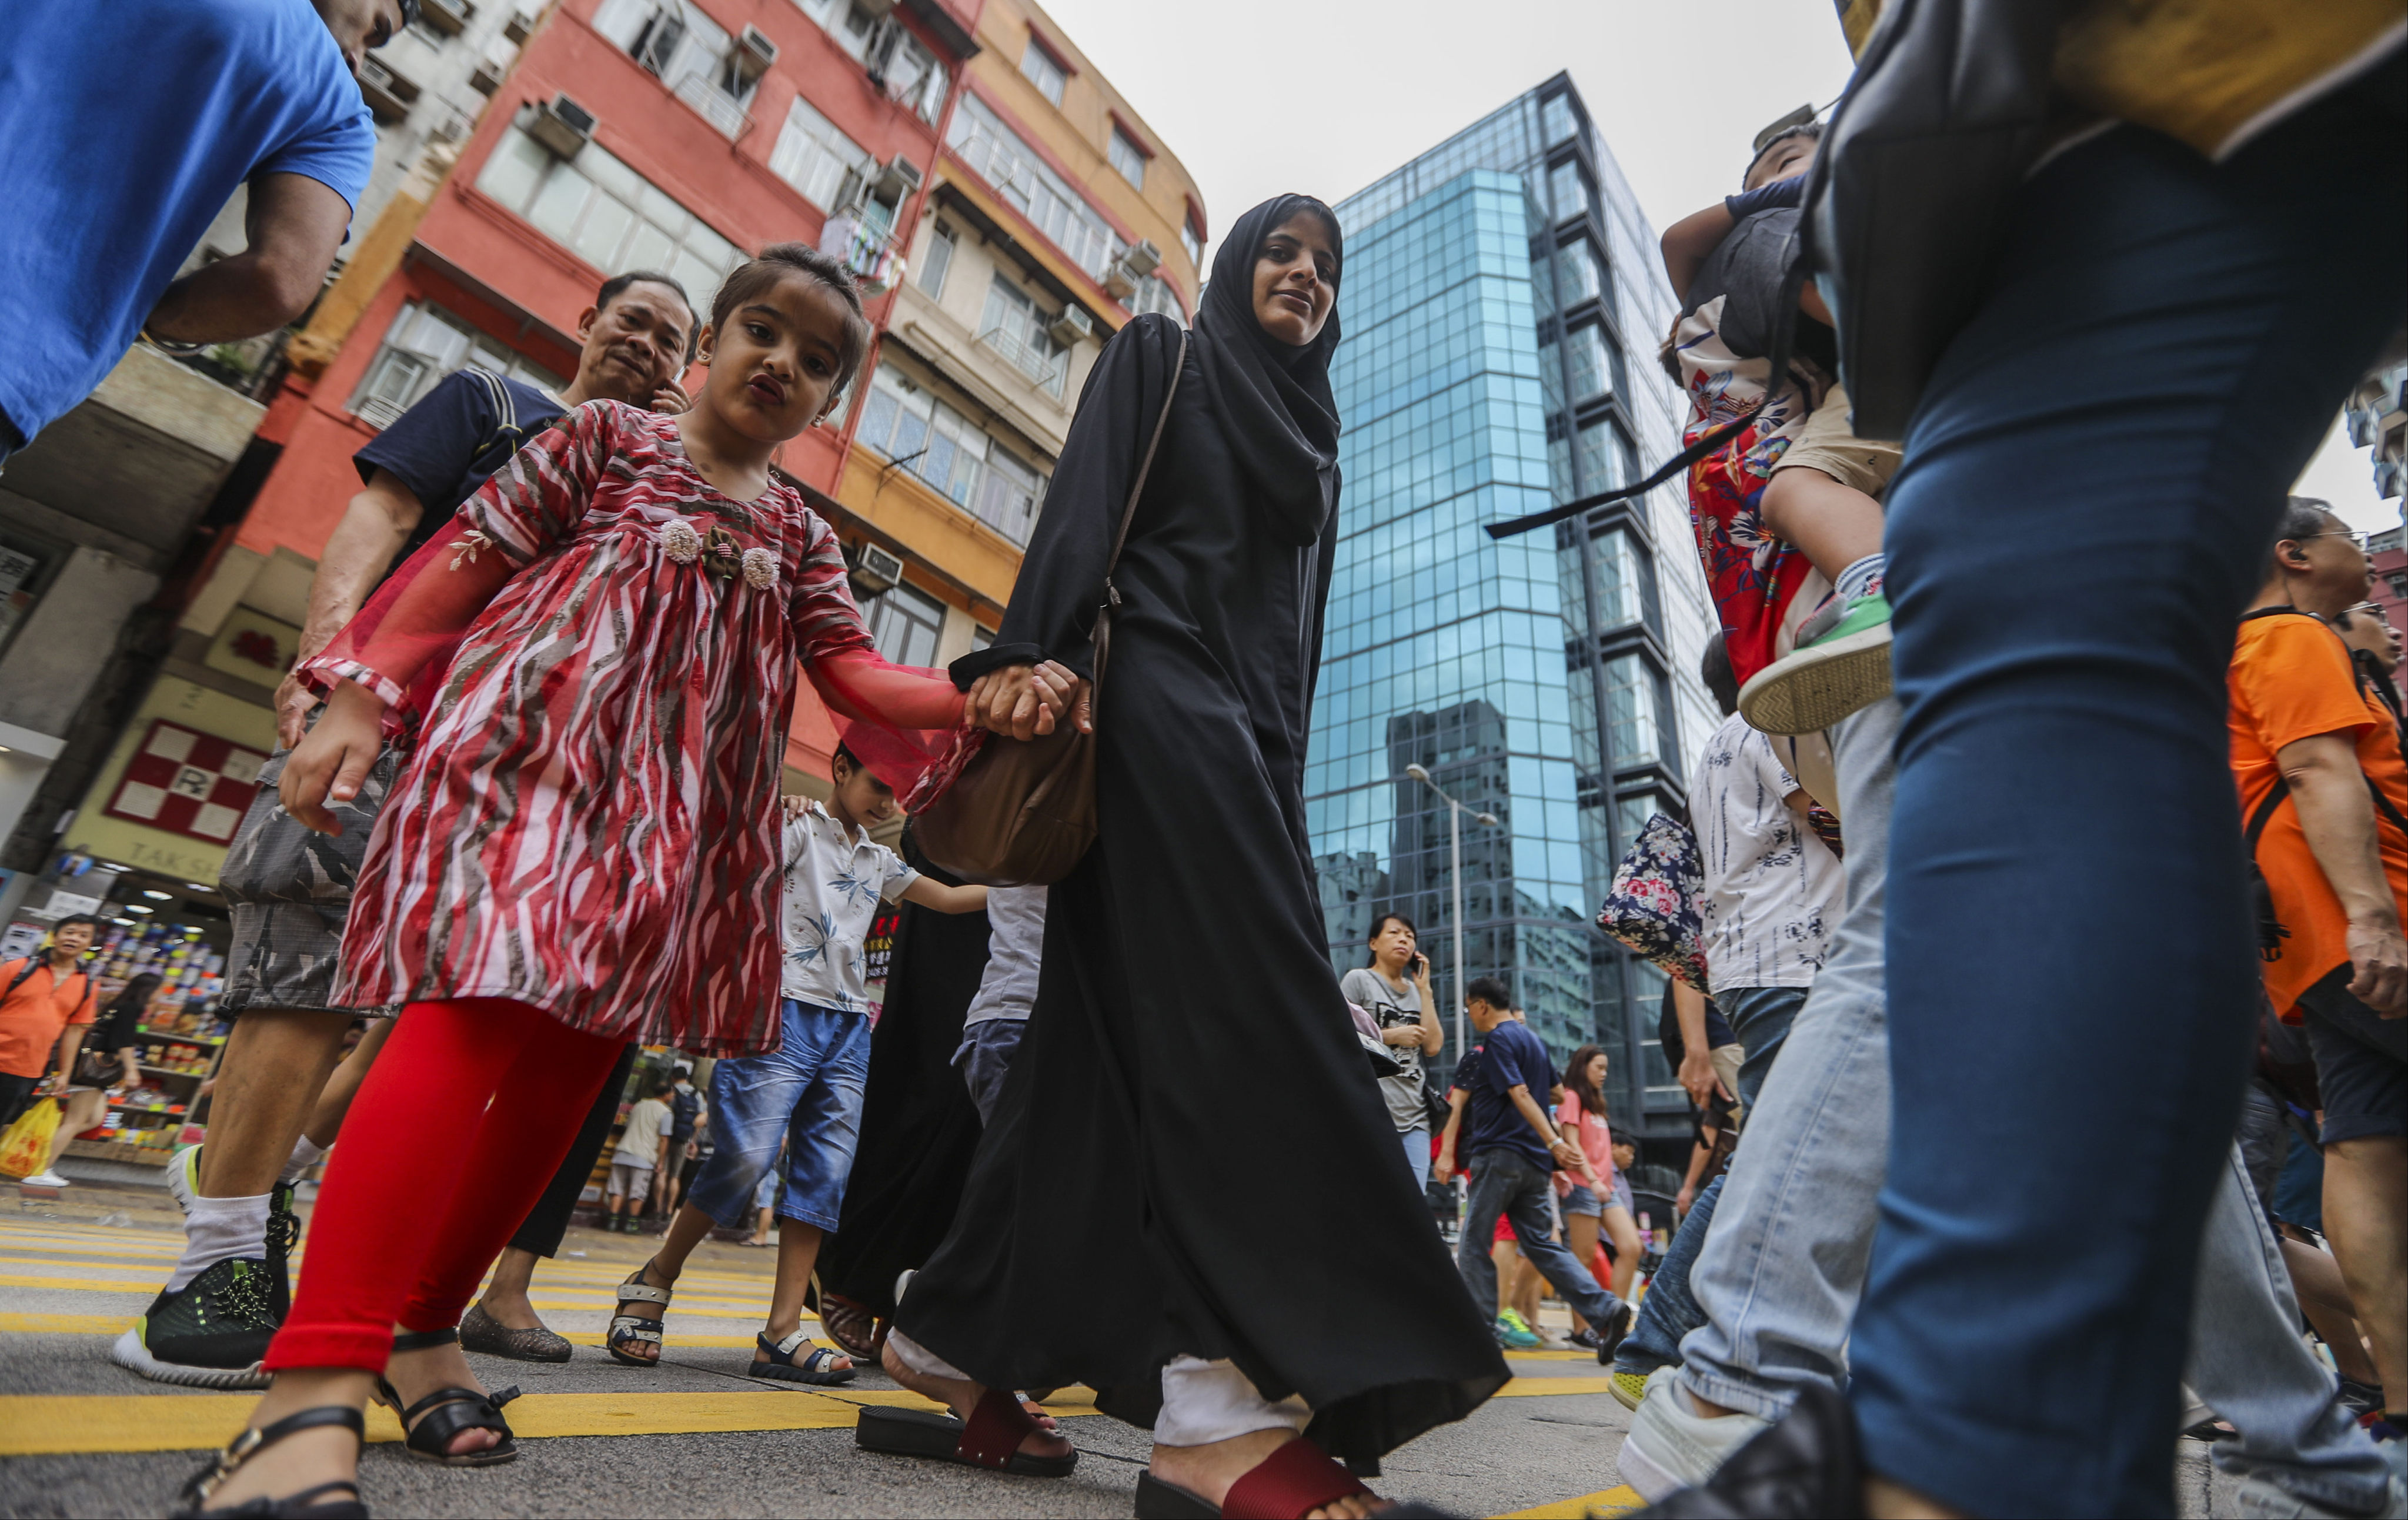 People cross the road in Sham Shui Po, Hong Kong in 2018. All children, irrespective of their ethnicity and cultural background, deserve equal opportunity in education. Photo: Edward Wong 